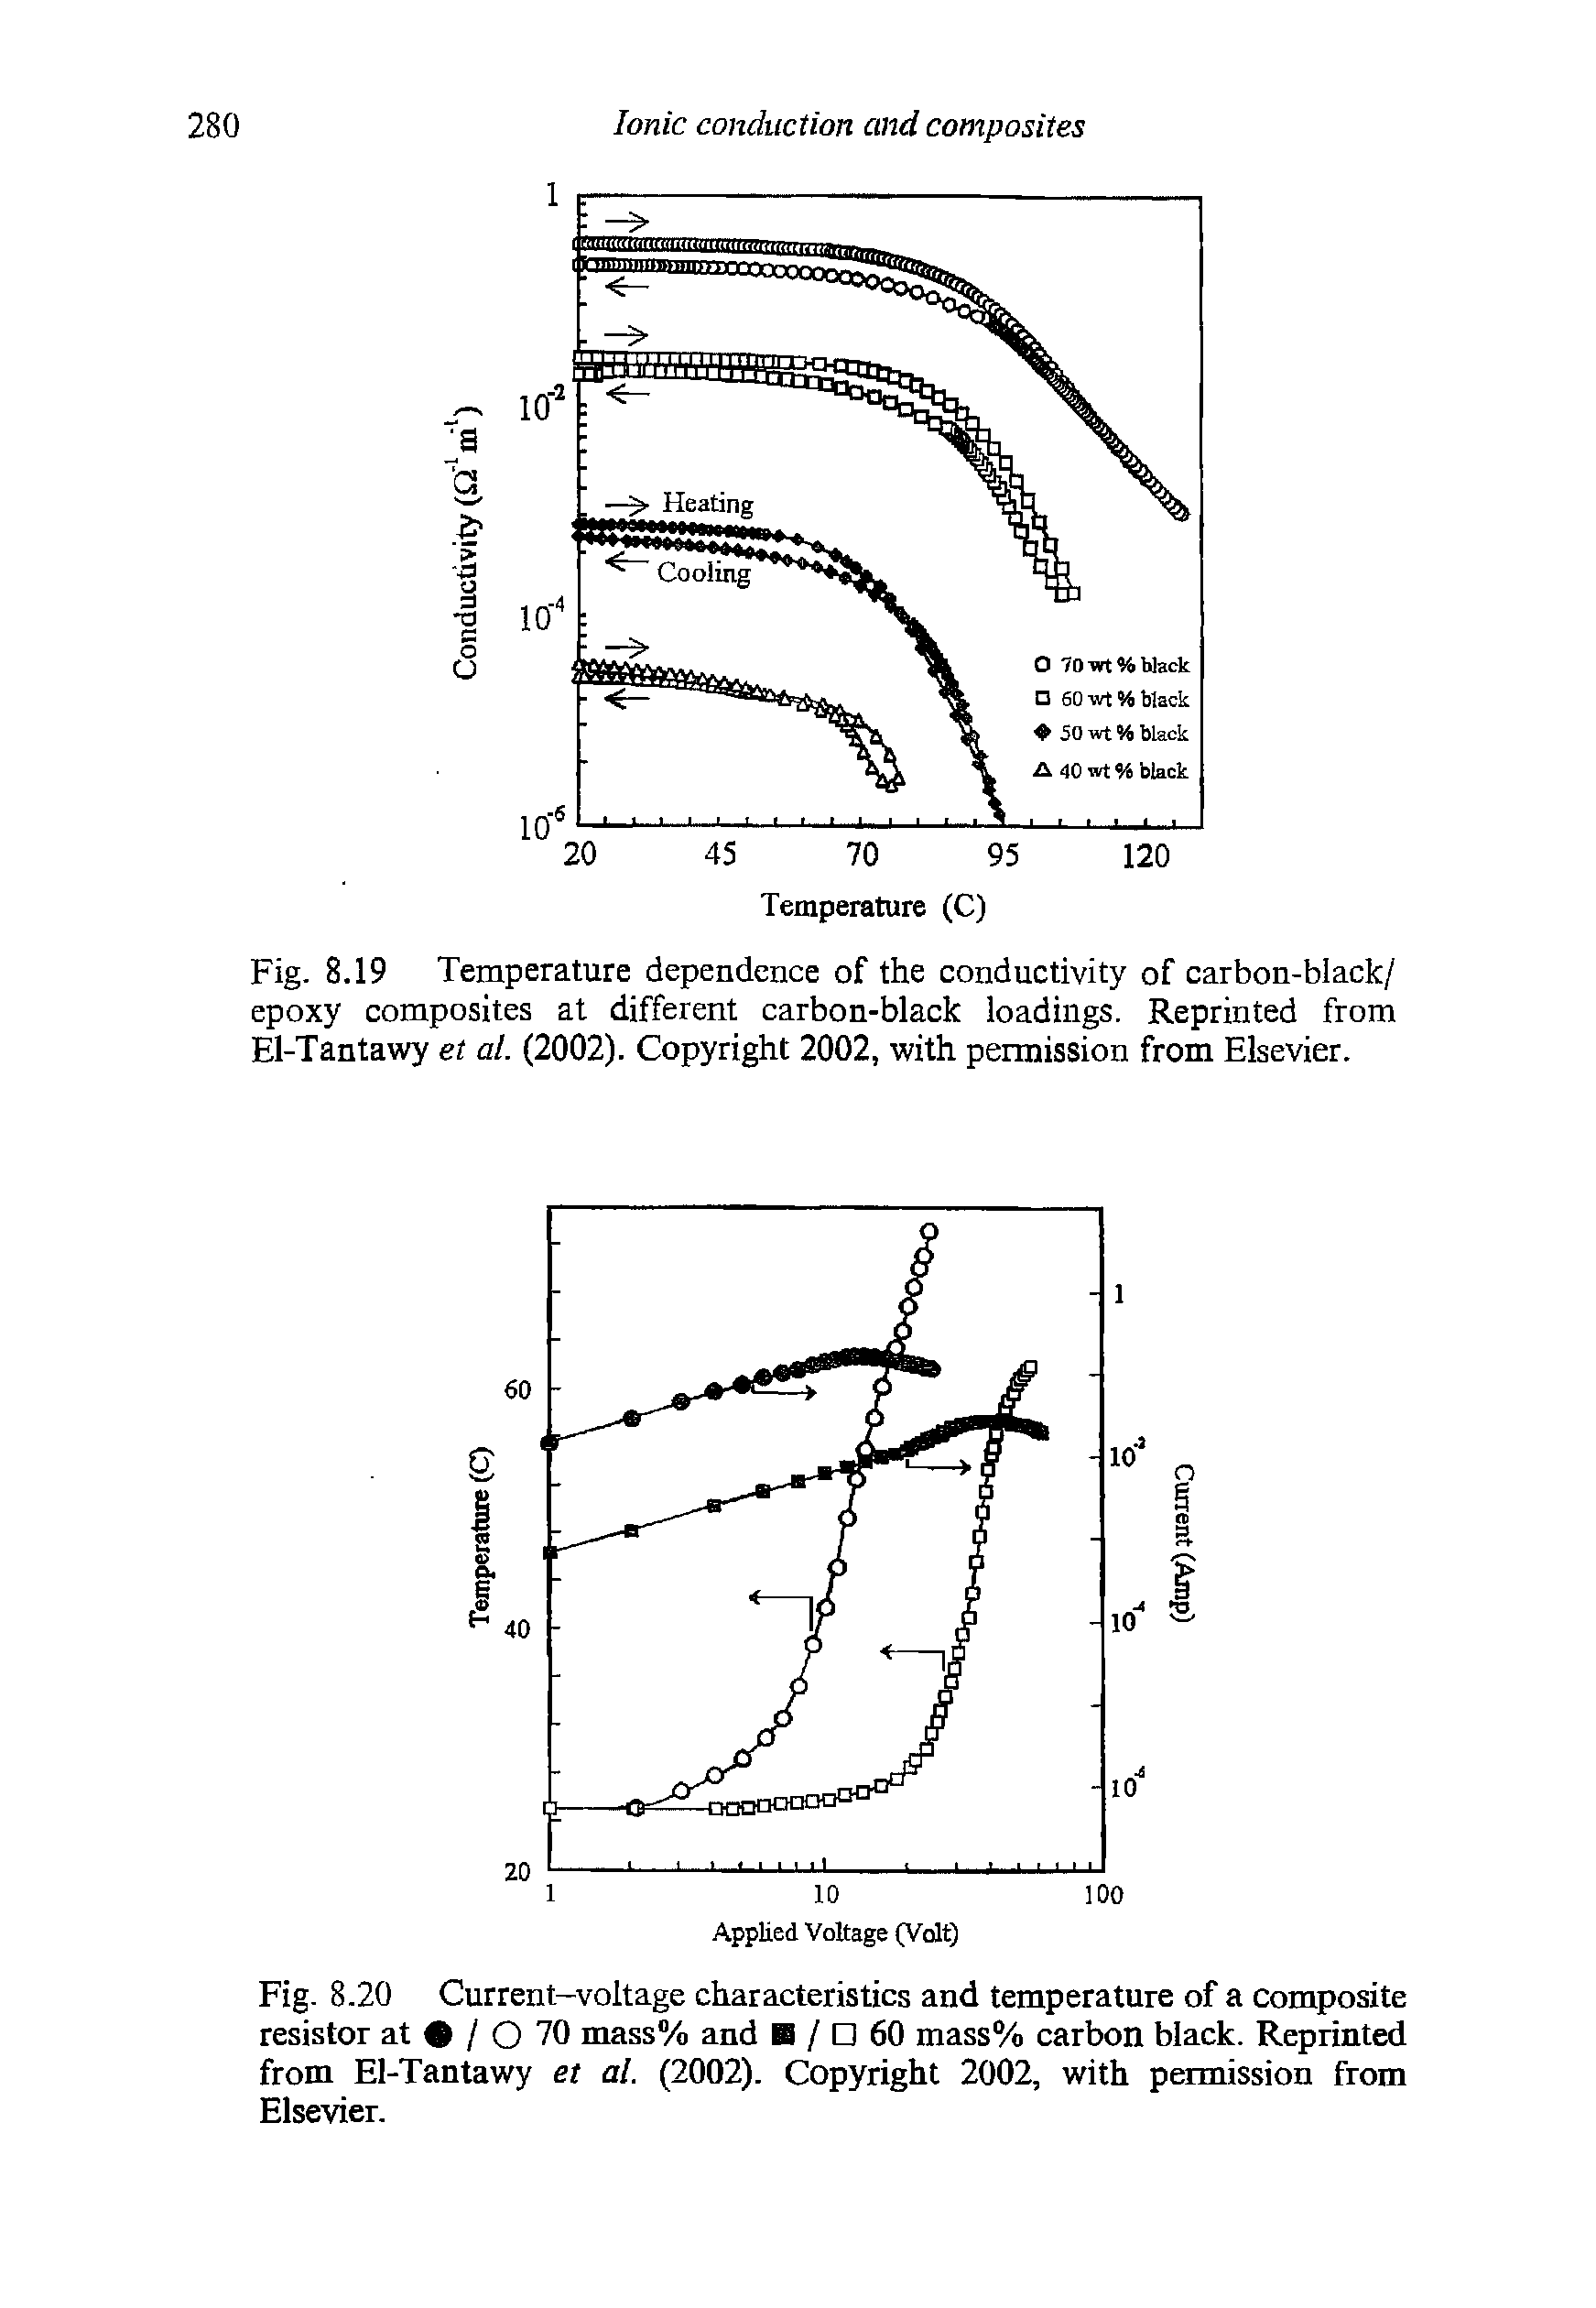 Fig. 8.19 Temperature dependence of the conductivity of carbon-black/ epoxy composites at different carbon-black loadings. Reprinted from El-Tantawy et al. (2002). Copyright 2002, with permission from Elsevier.